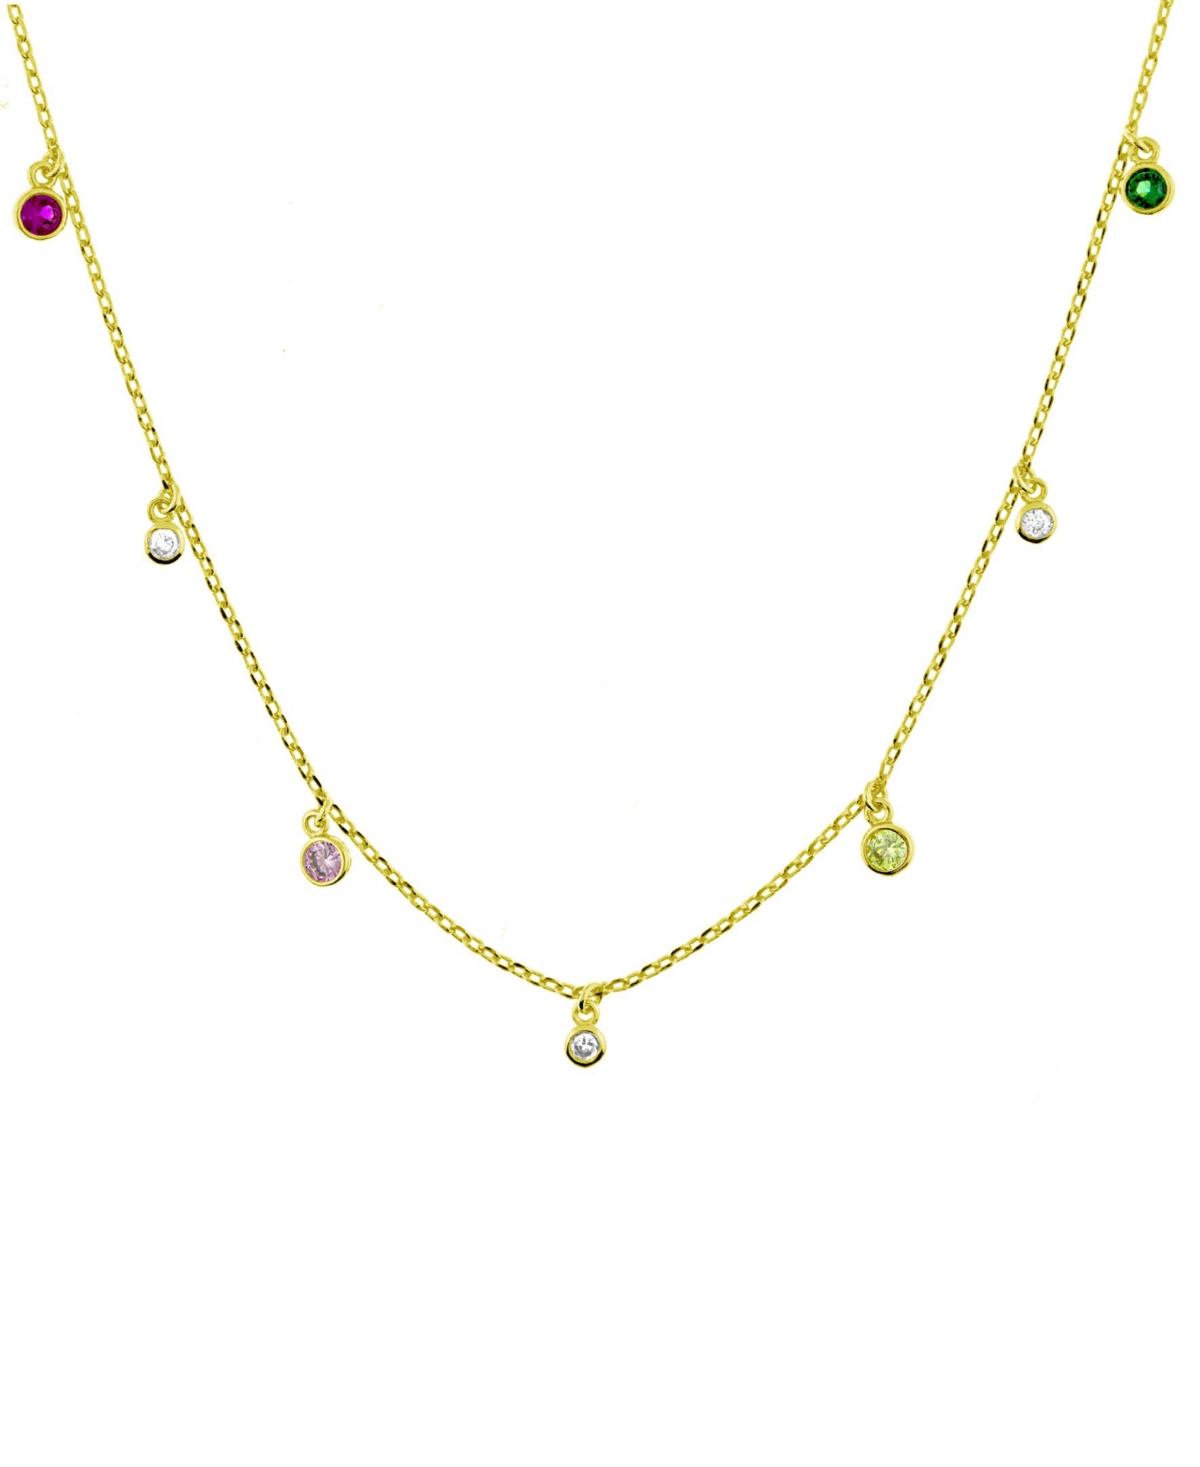 Multi Channel Color Stone Drop Necklace, Gold Plate 16"+2" extender - Gold-Tone